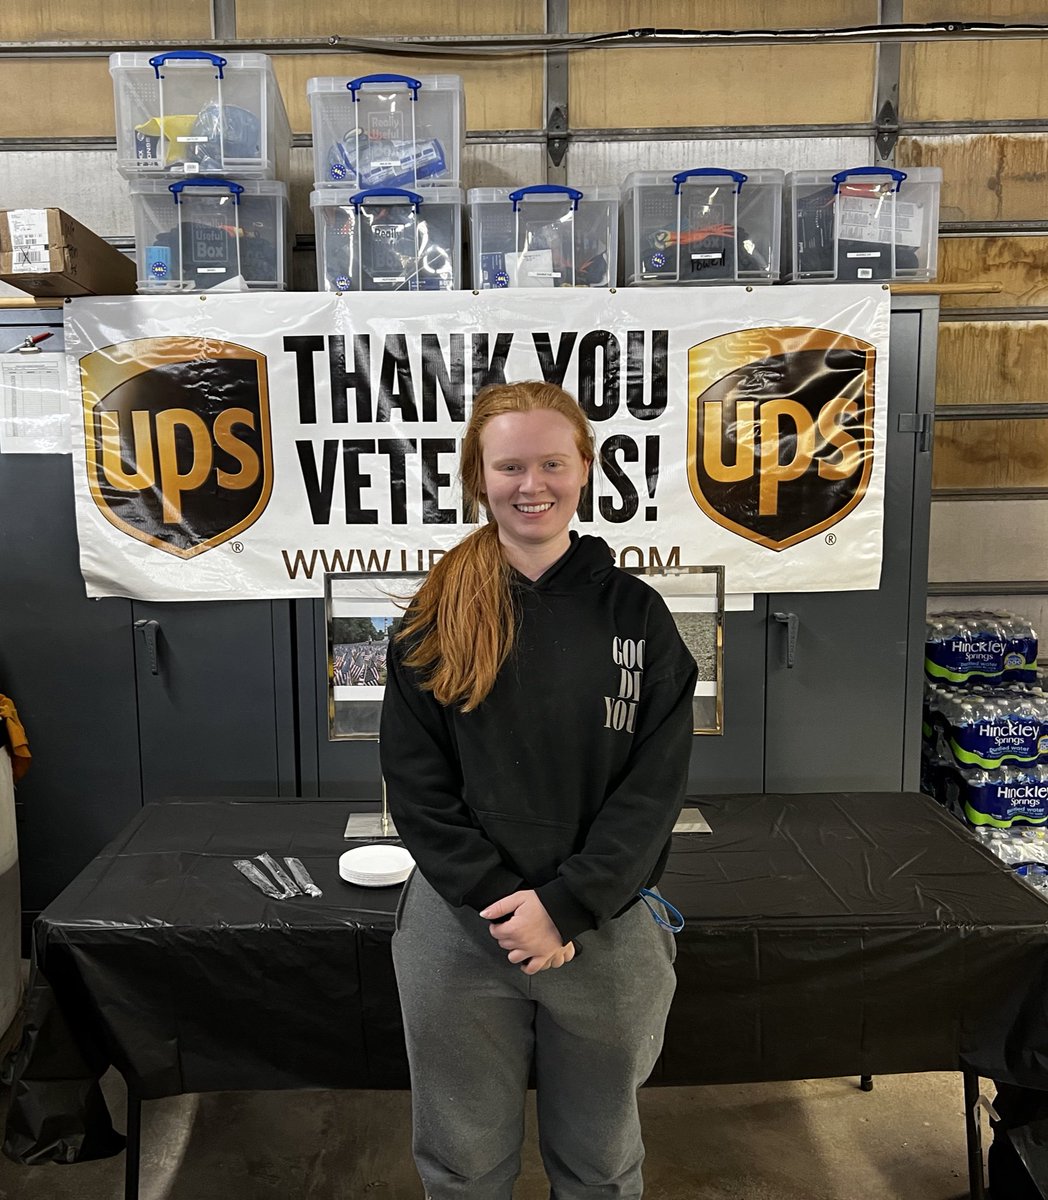 A few of our veterans 🇺🇸📦 thank you for your service; Jake, Shawn & Mia! #VeteransDay #Veterans #UPSERS #UPS #ThankYouForYourService #America @NP_UPSers @Aquiroga32 @jrindafernshaw @justjane80 @MondoSaucedo @ericgriffin86 @PennieBendt @AJNelsonSeattle